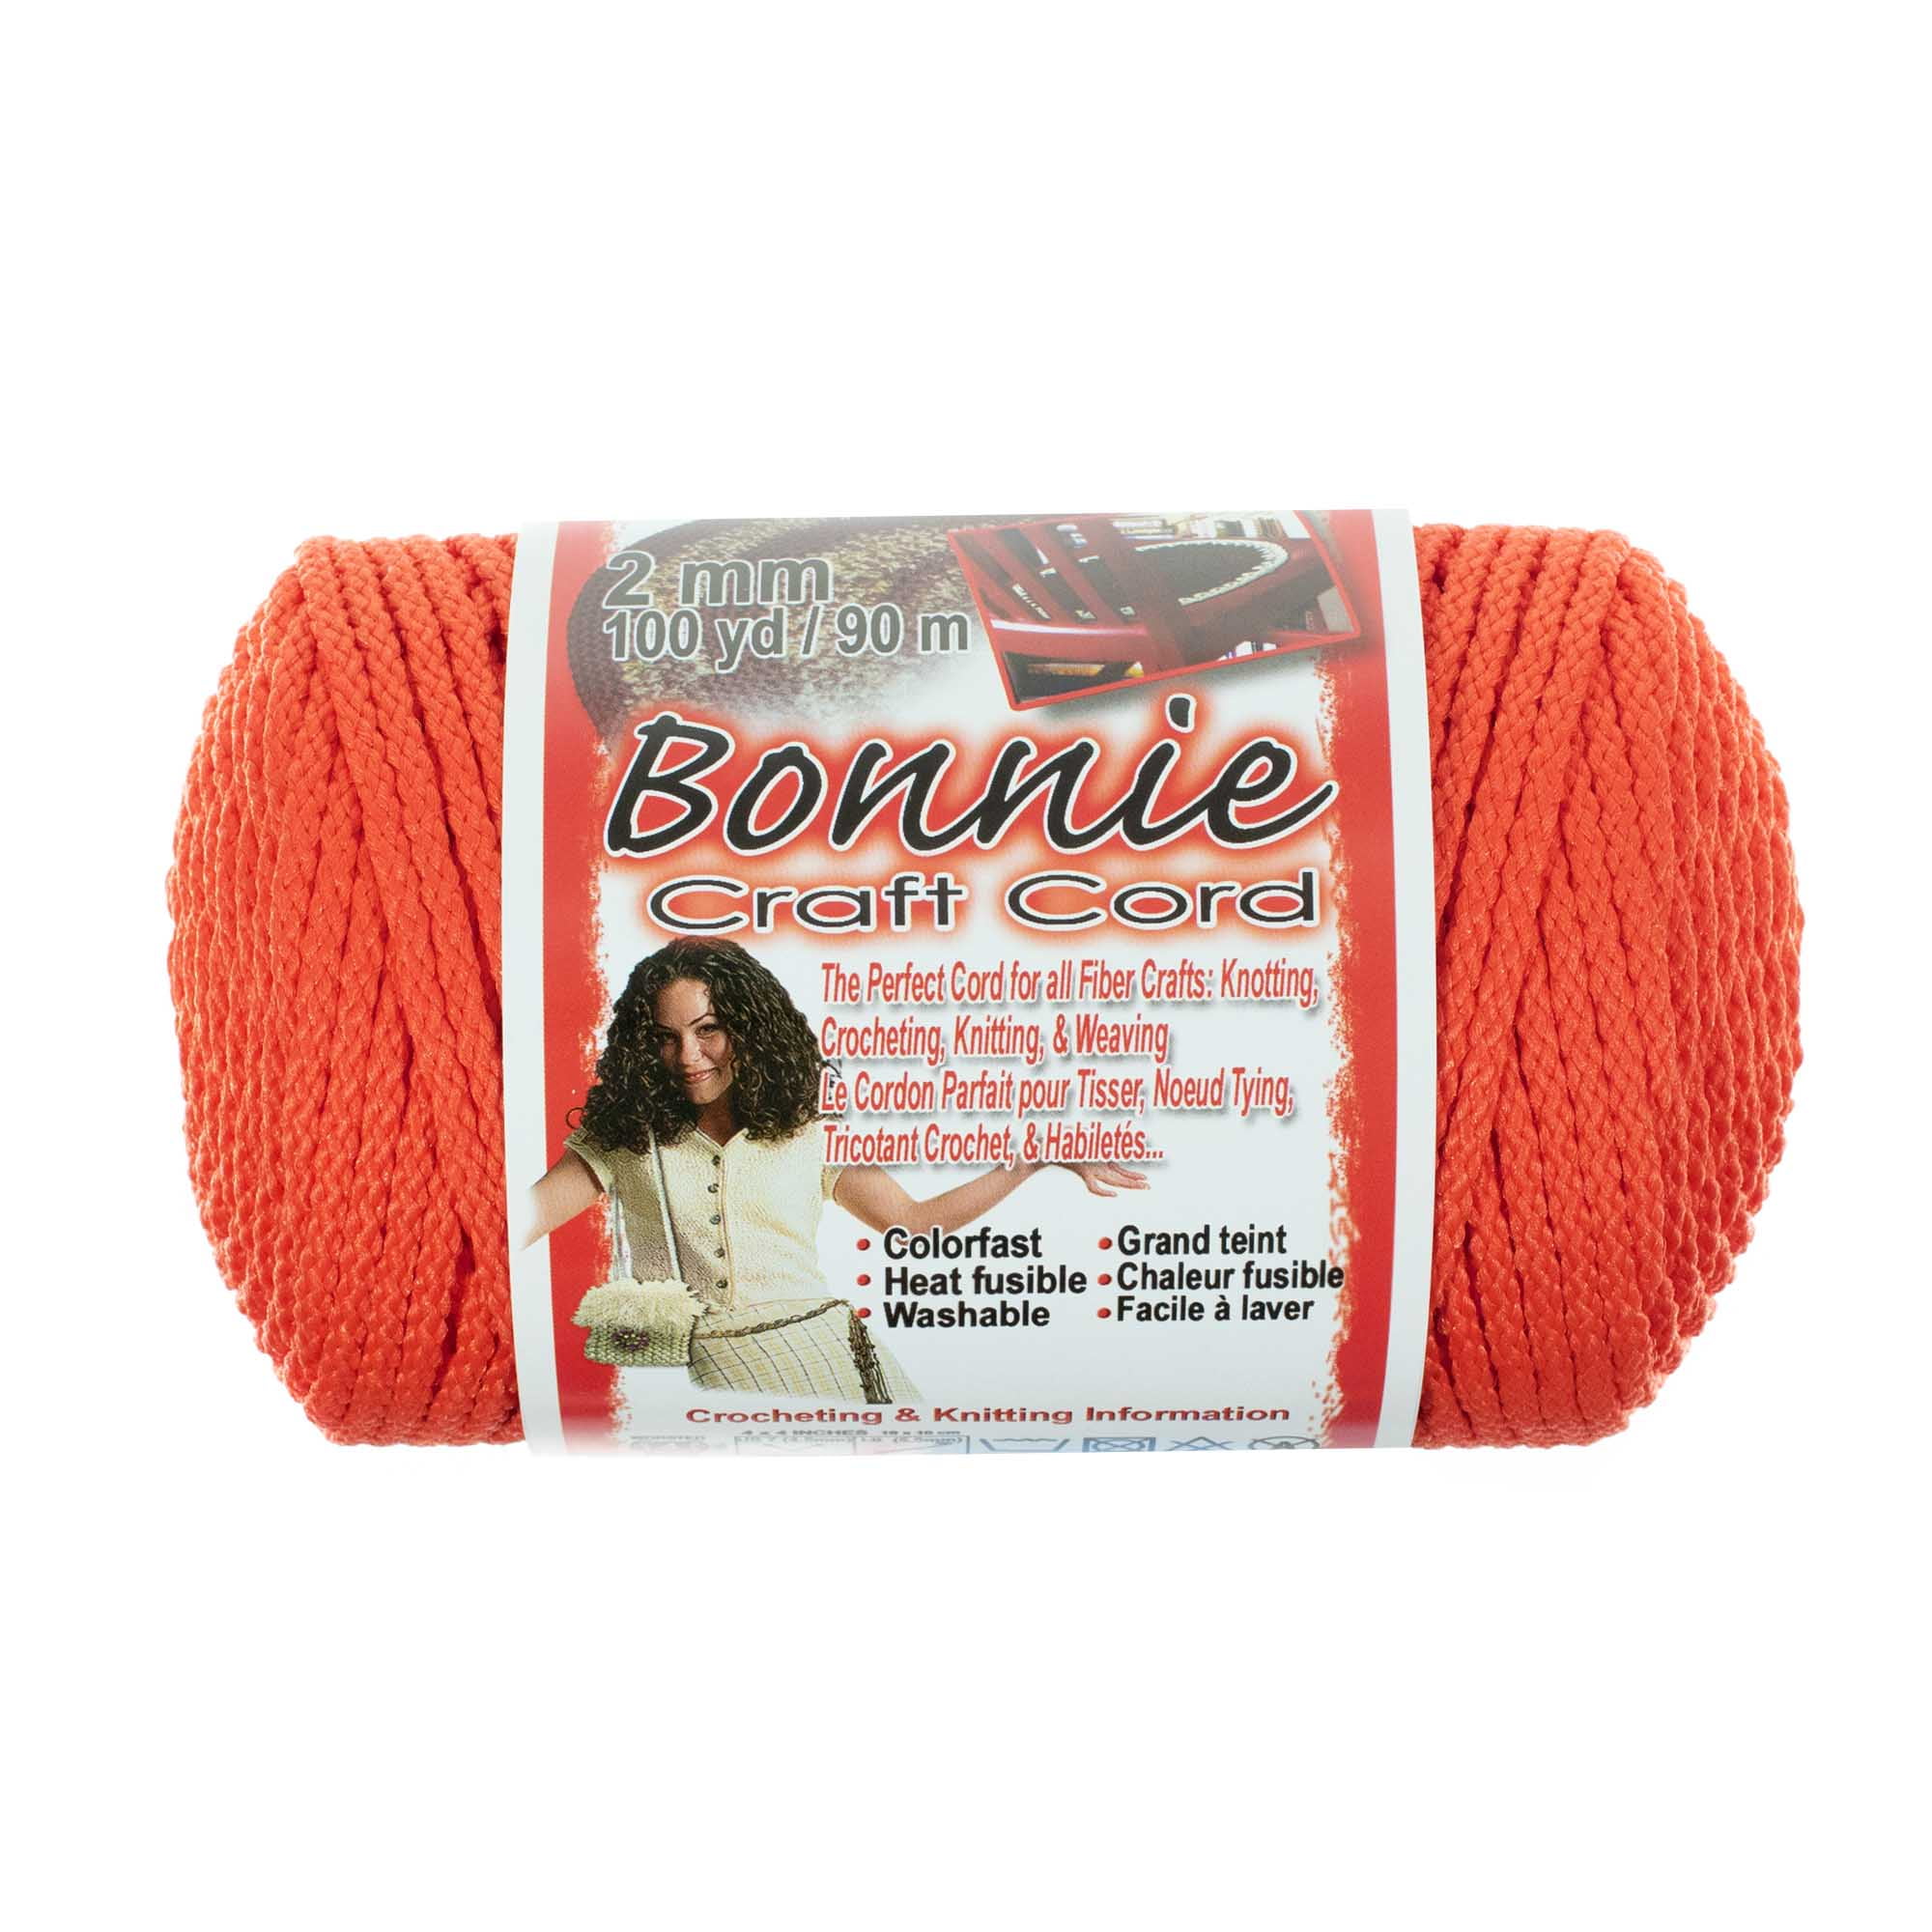 2mm Bonnie Crafting Cord in Many Colors - 100 Yard Spools - Great for  Macrame, Crochet, and Knitting 